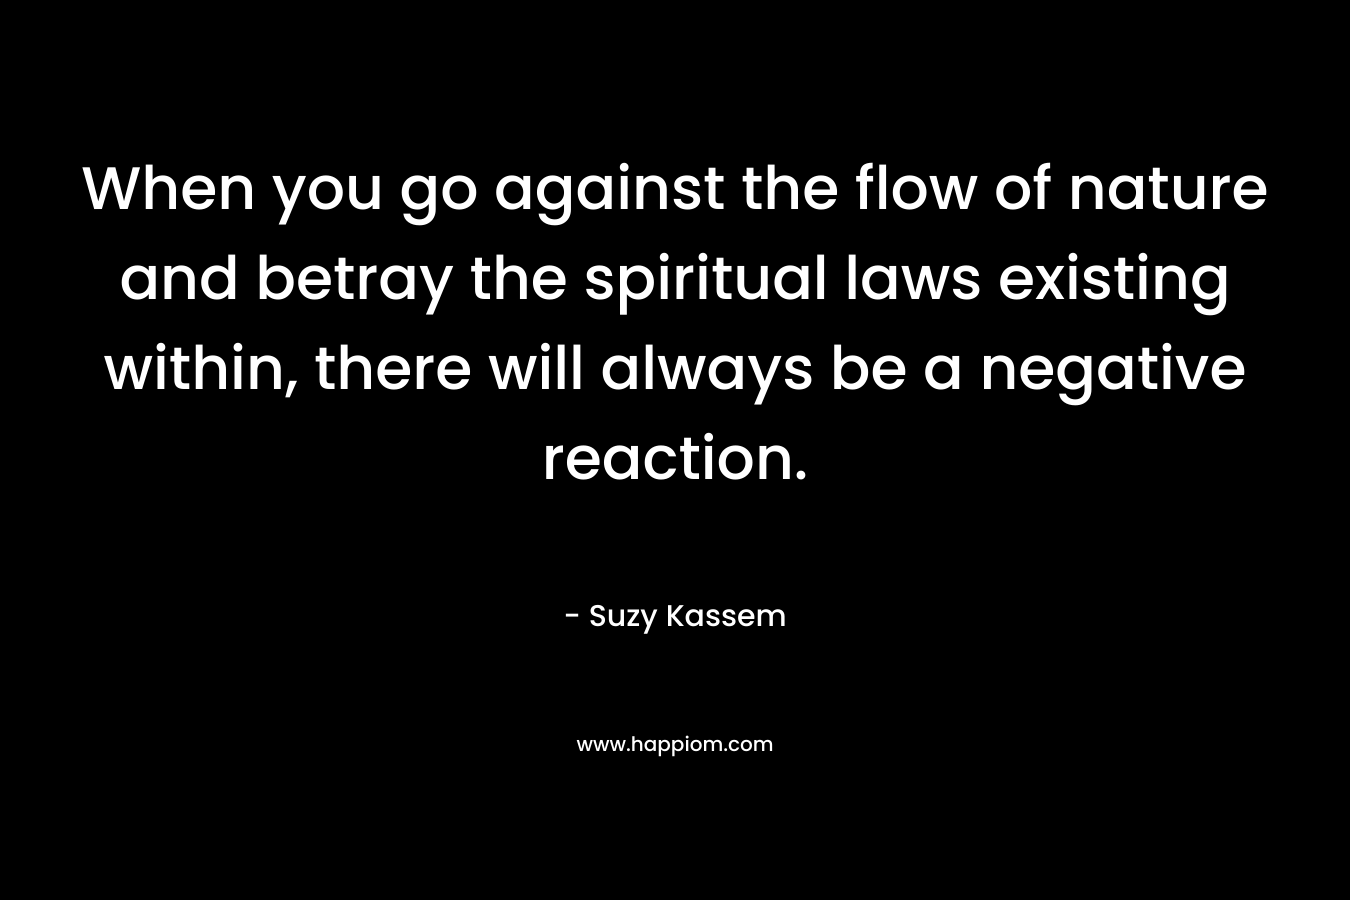 When you go against the flow of nature and betray the spiritual laws existing within, there will always be a negative reaction.